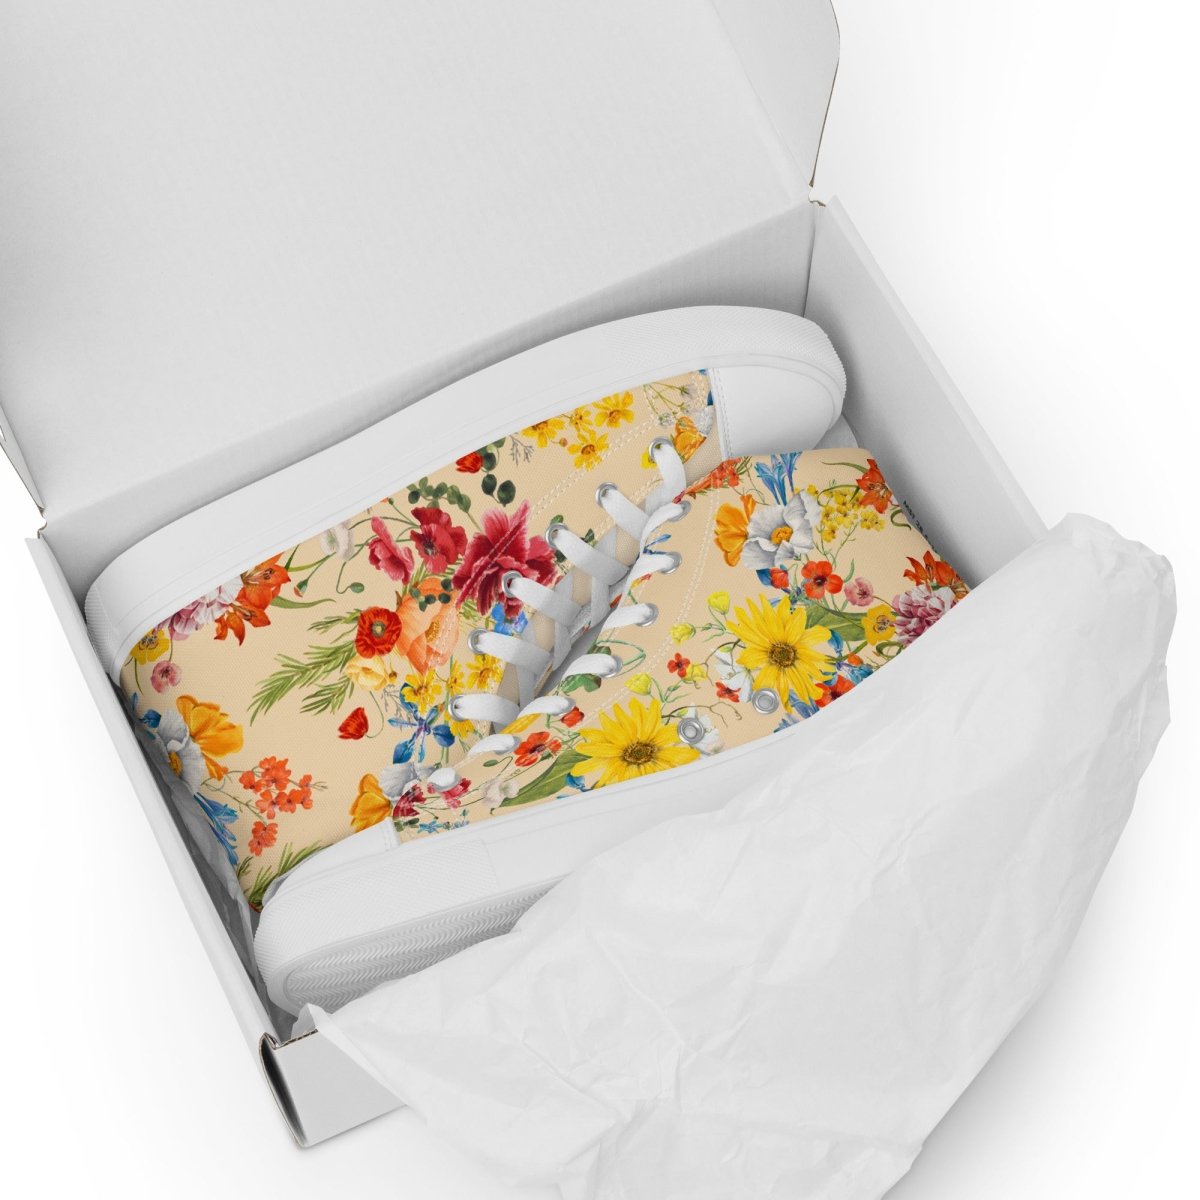 Women's Spring Flowers Sneakers - DoggyLoveandMore